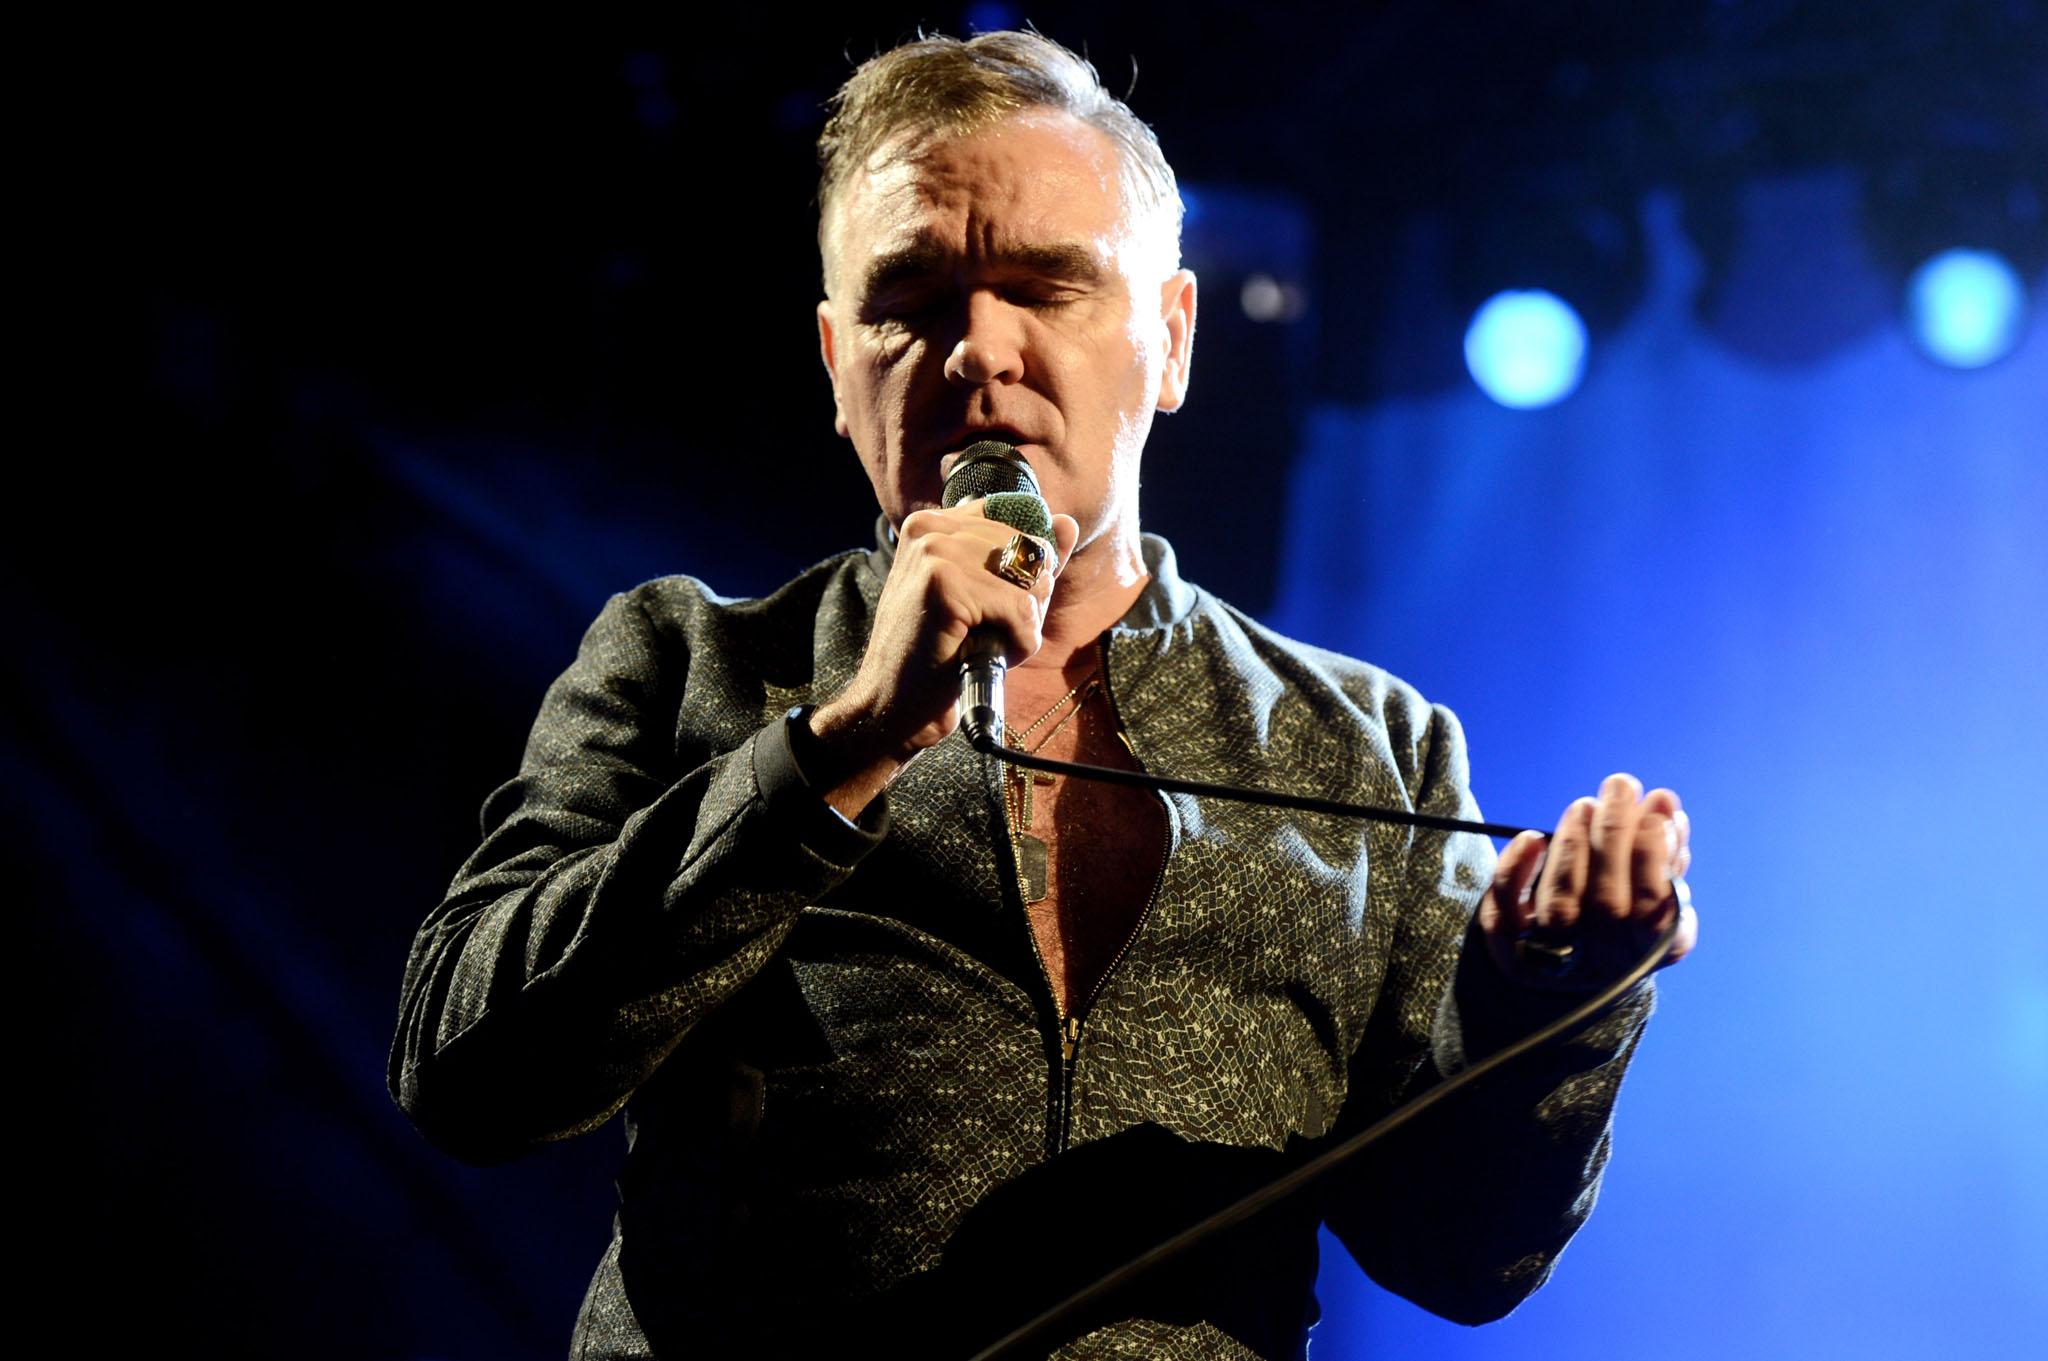 Morrissey has claimed that Obama is 'white inside'